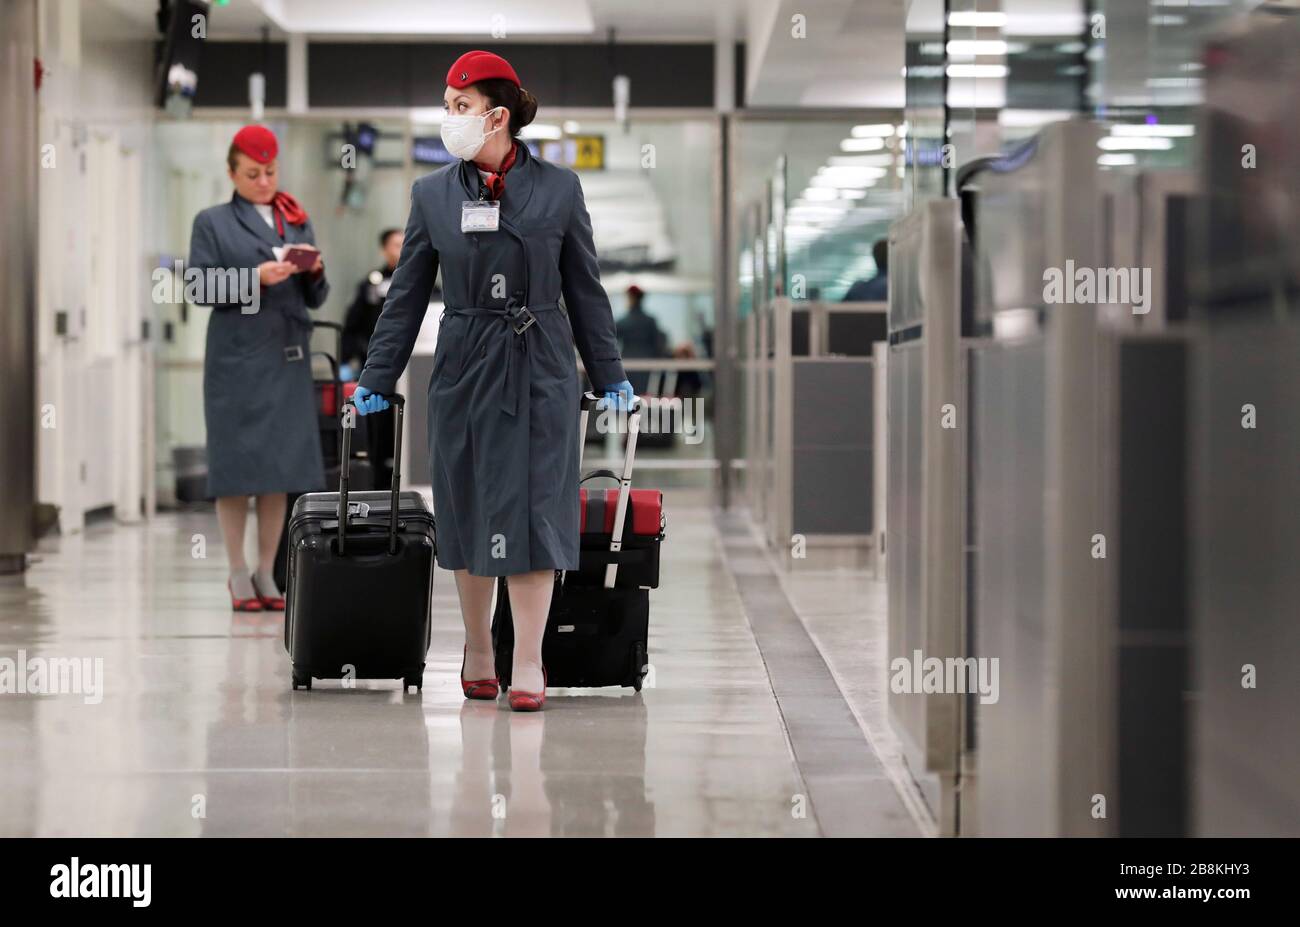 Flight crews arriving at Dulles International Airport wearing personal protective equipment March 13, 2020 in Dulles, Virginia. In response to the COVID-19, coronavirus pandemic CBP officers and travelers have begun wearing gloves and masks as protection from viral exposure. Stock Photo